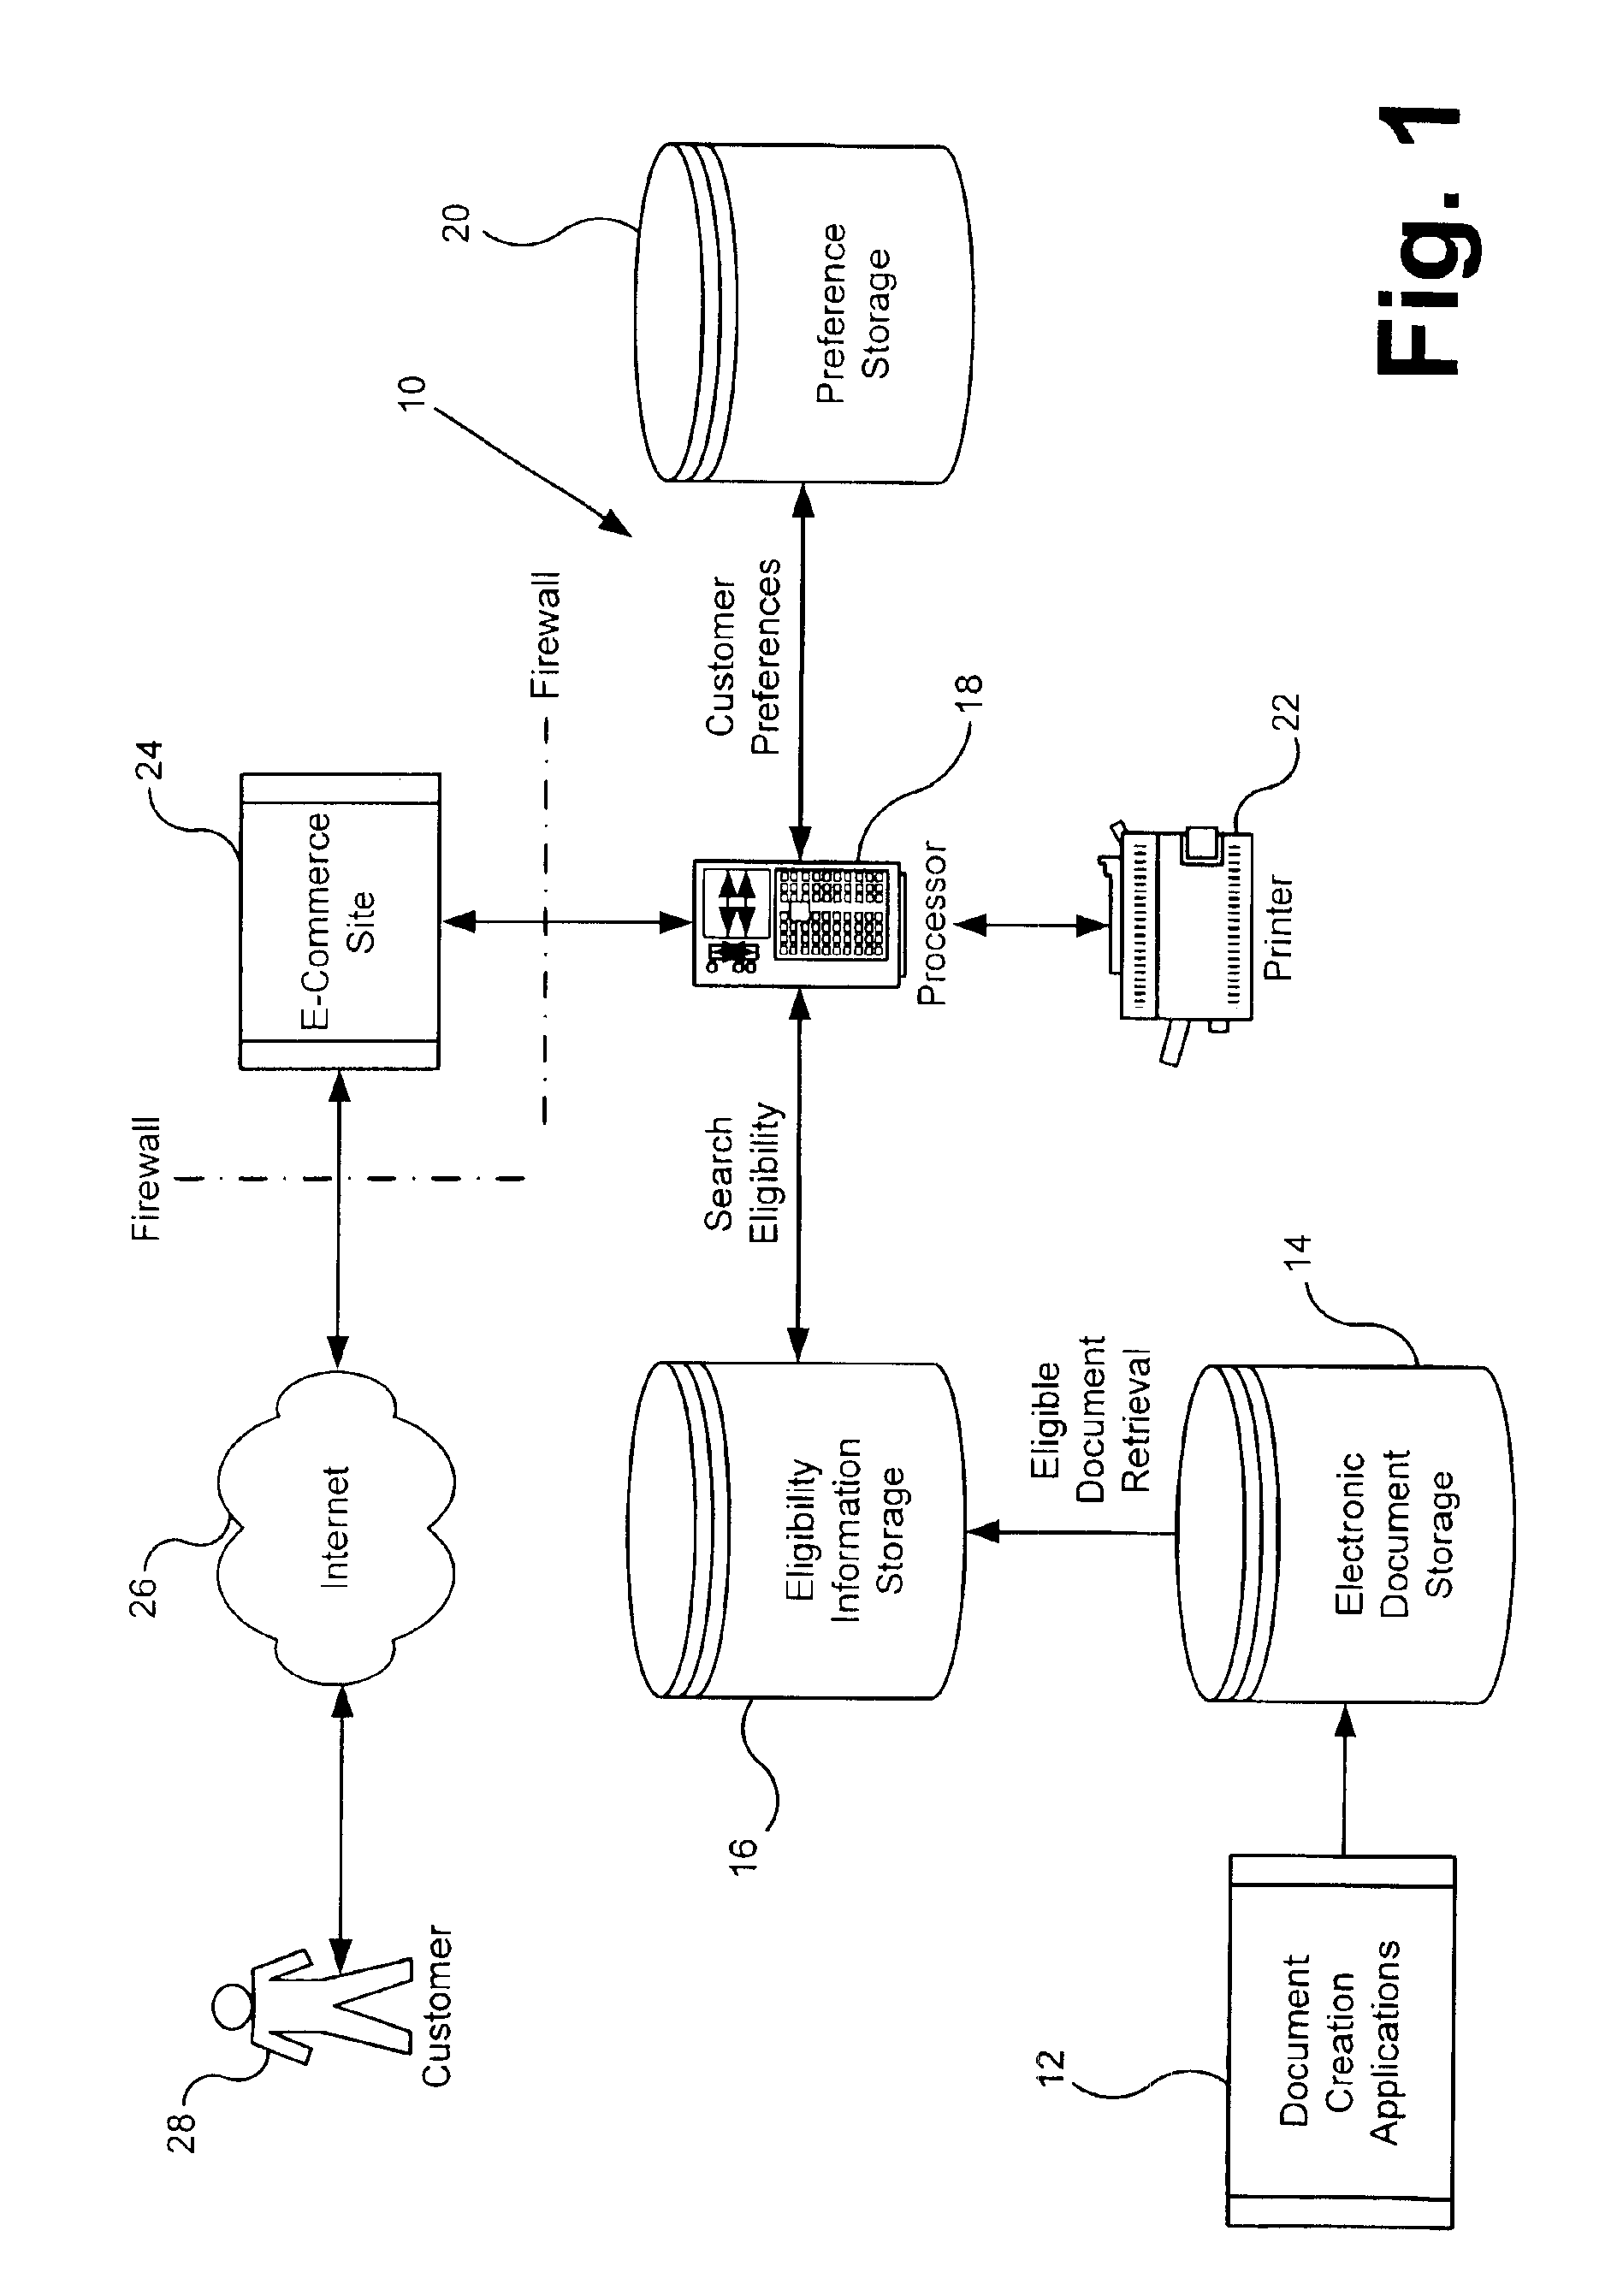 System and method of providing electronic access to one or more documents